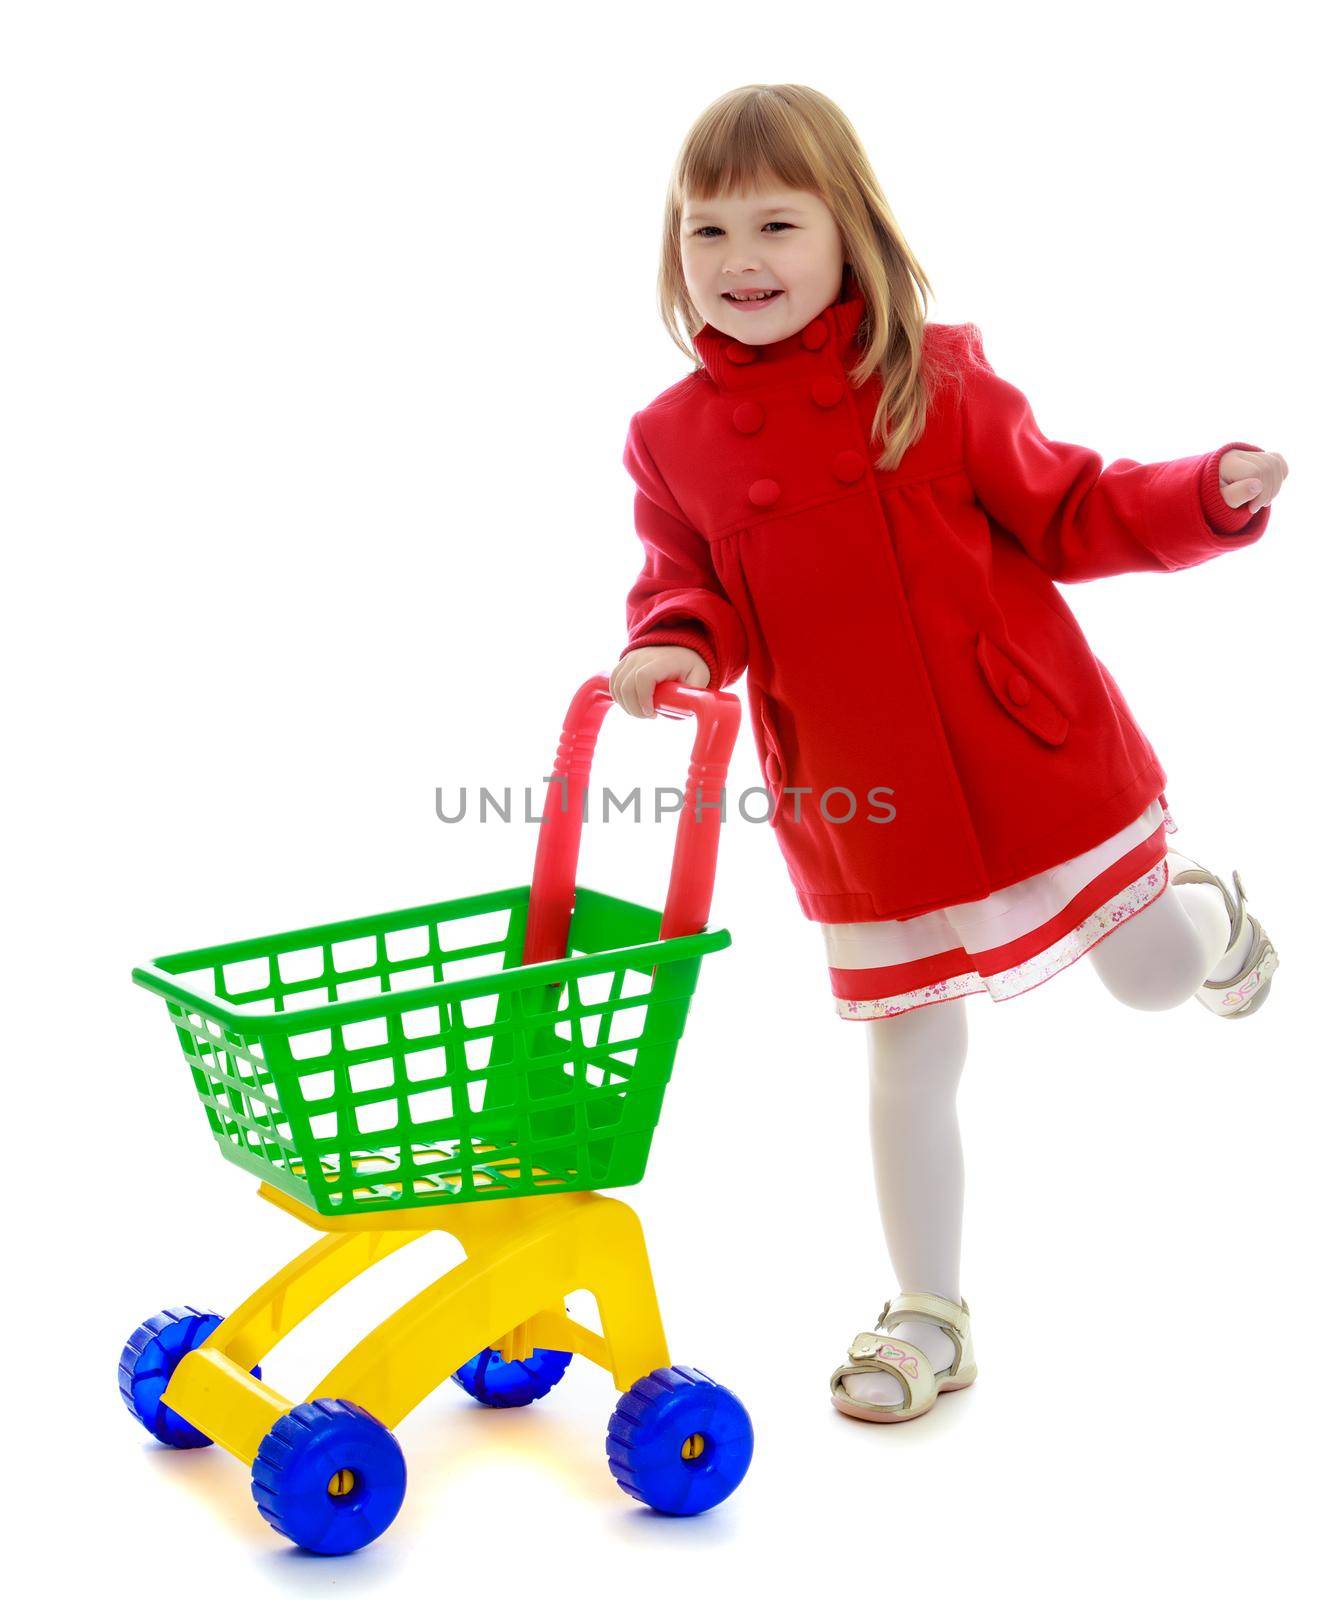 Cute little girl in a red coat, with a toy shopping cart.Isolated on white background.1